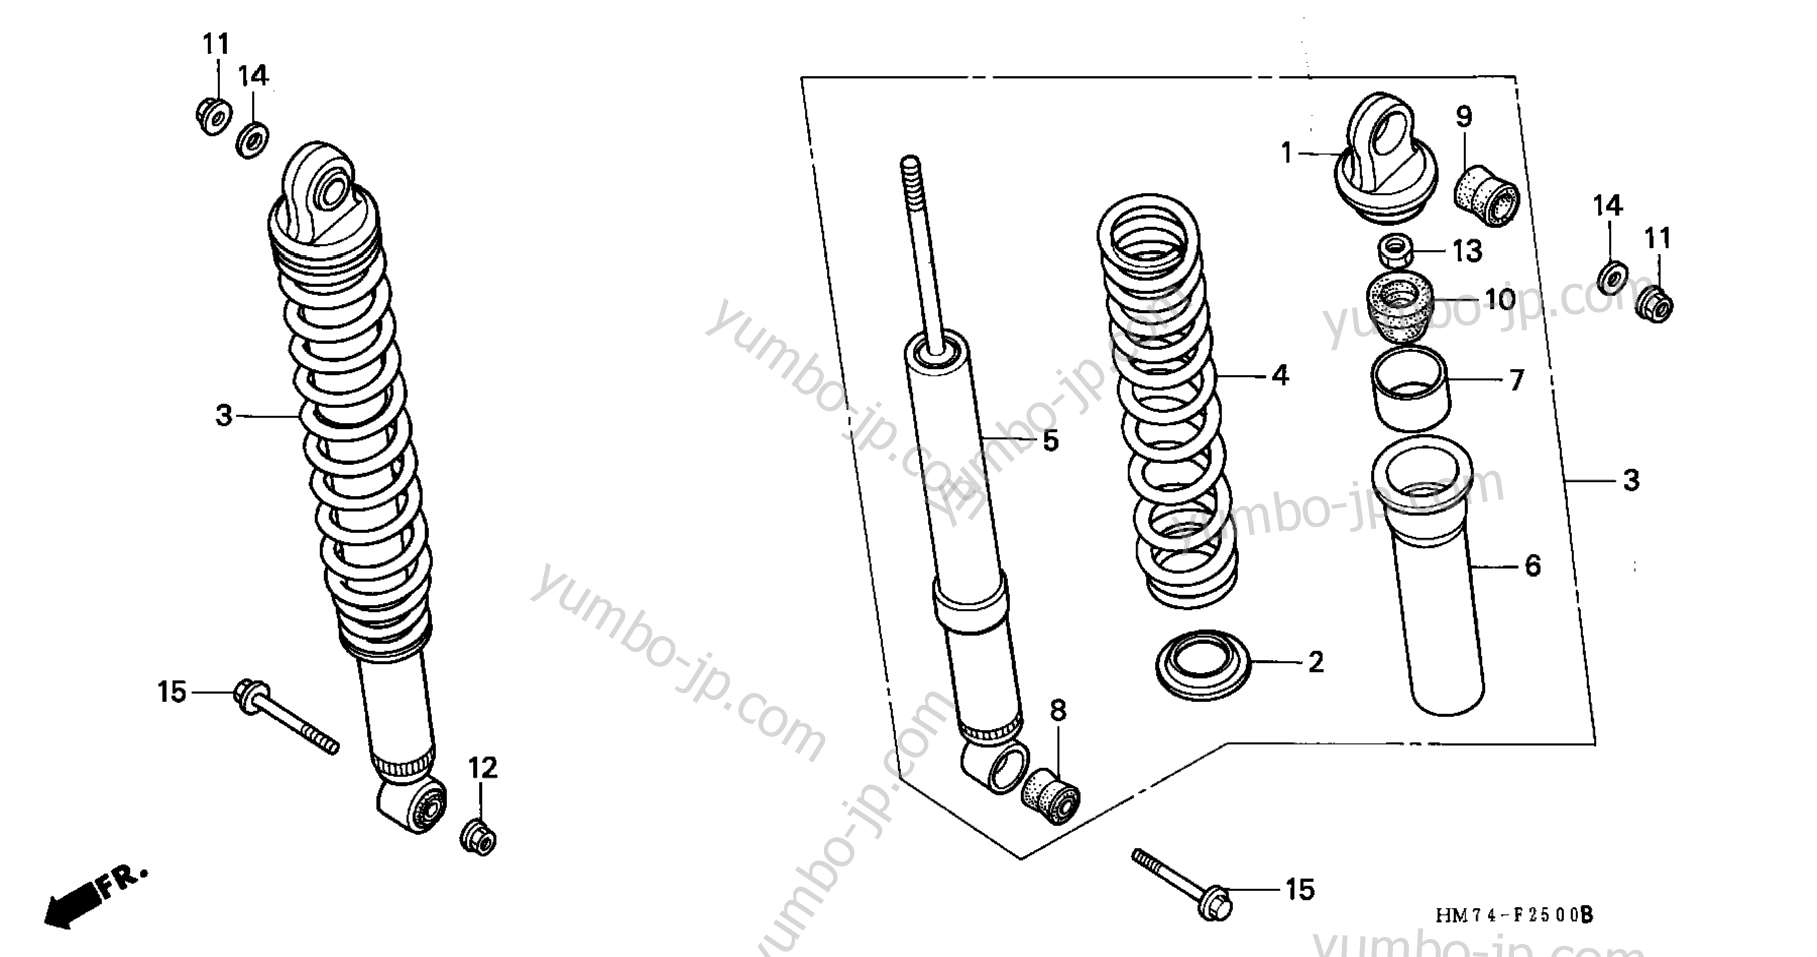 REAR SHOCK ABSORBER for ATVs HONDA TRX400FW A 1995 year